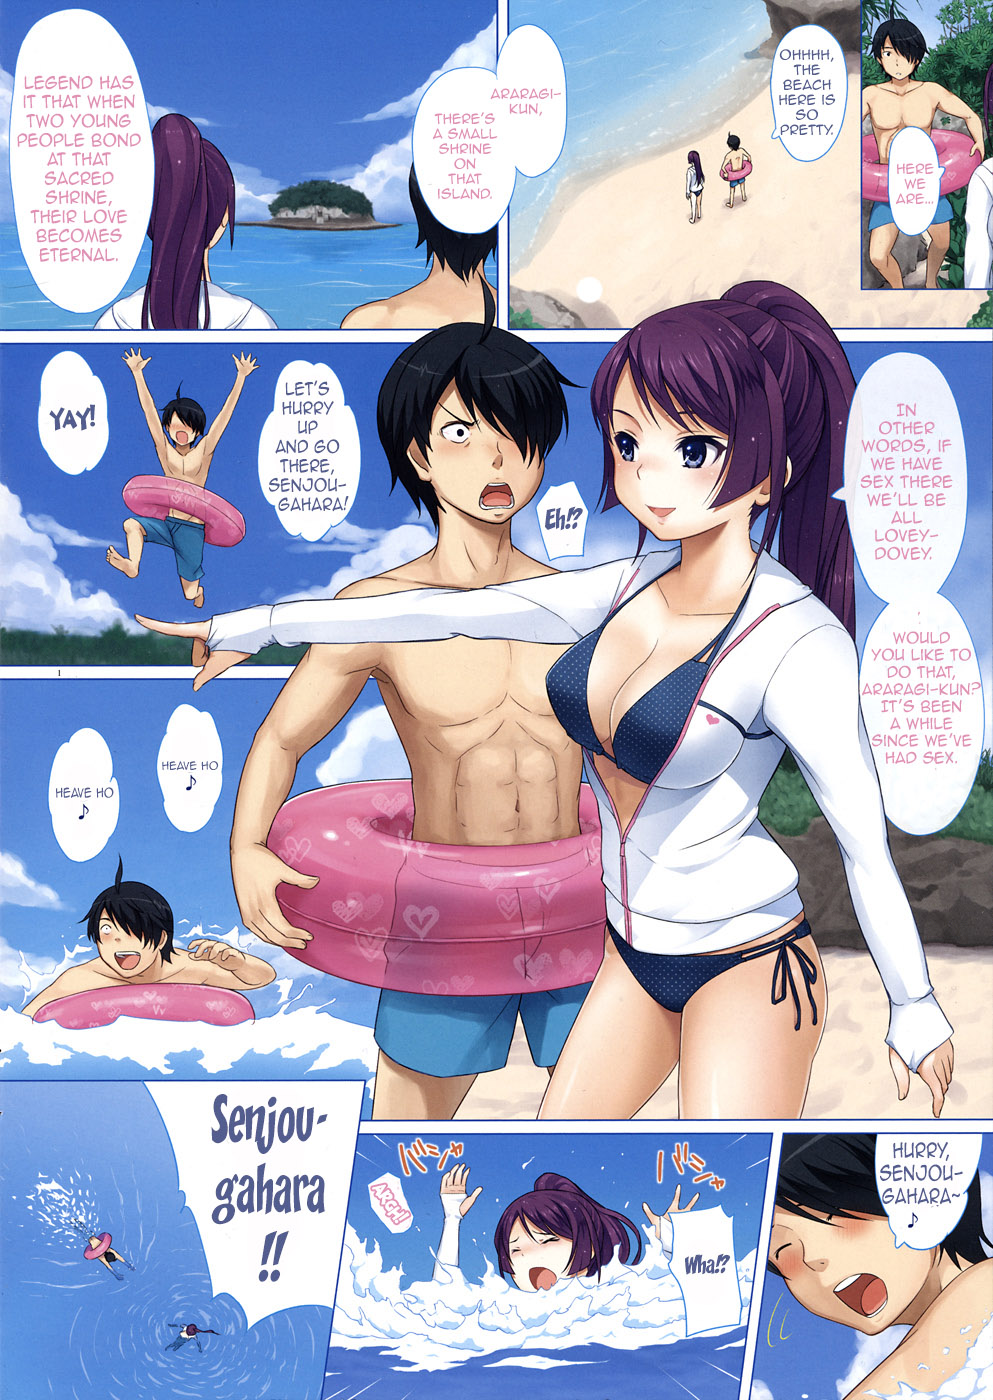 Sexy anime girlfriend gets turned on by hot public sex on the beach - hentai manga pic